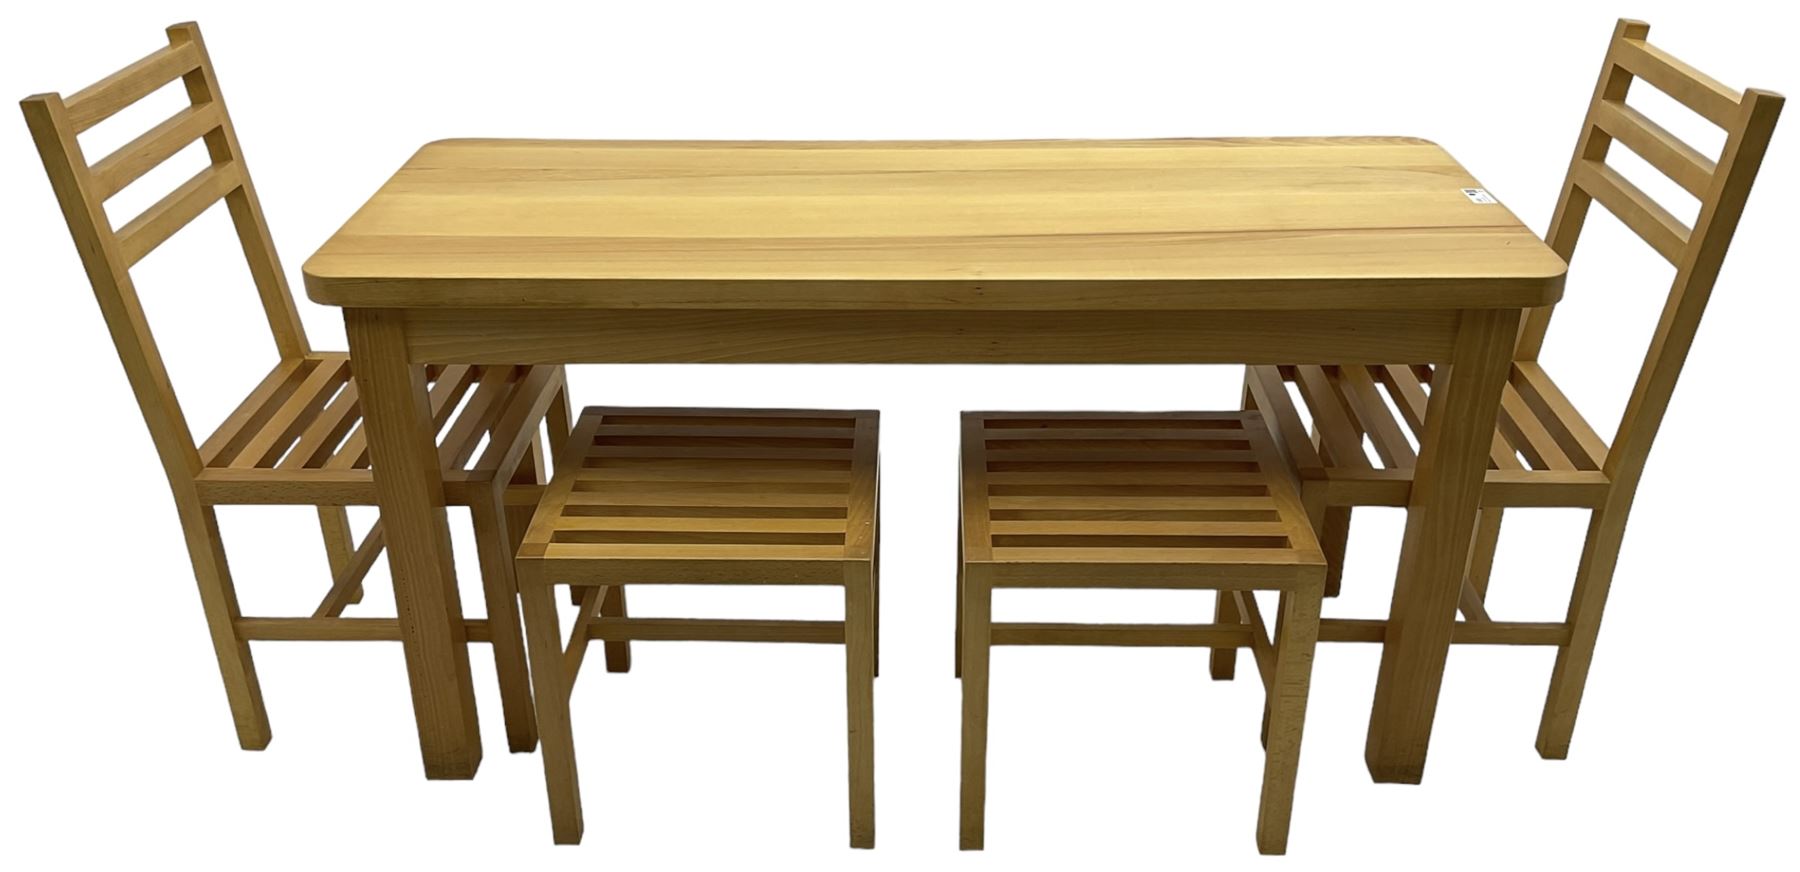 Light beech rectangular dining table; together with two chairs and two stools - Image 6 of 6